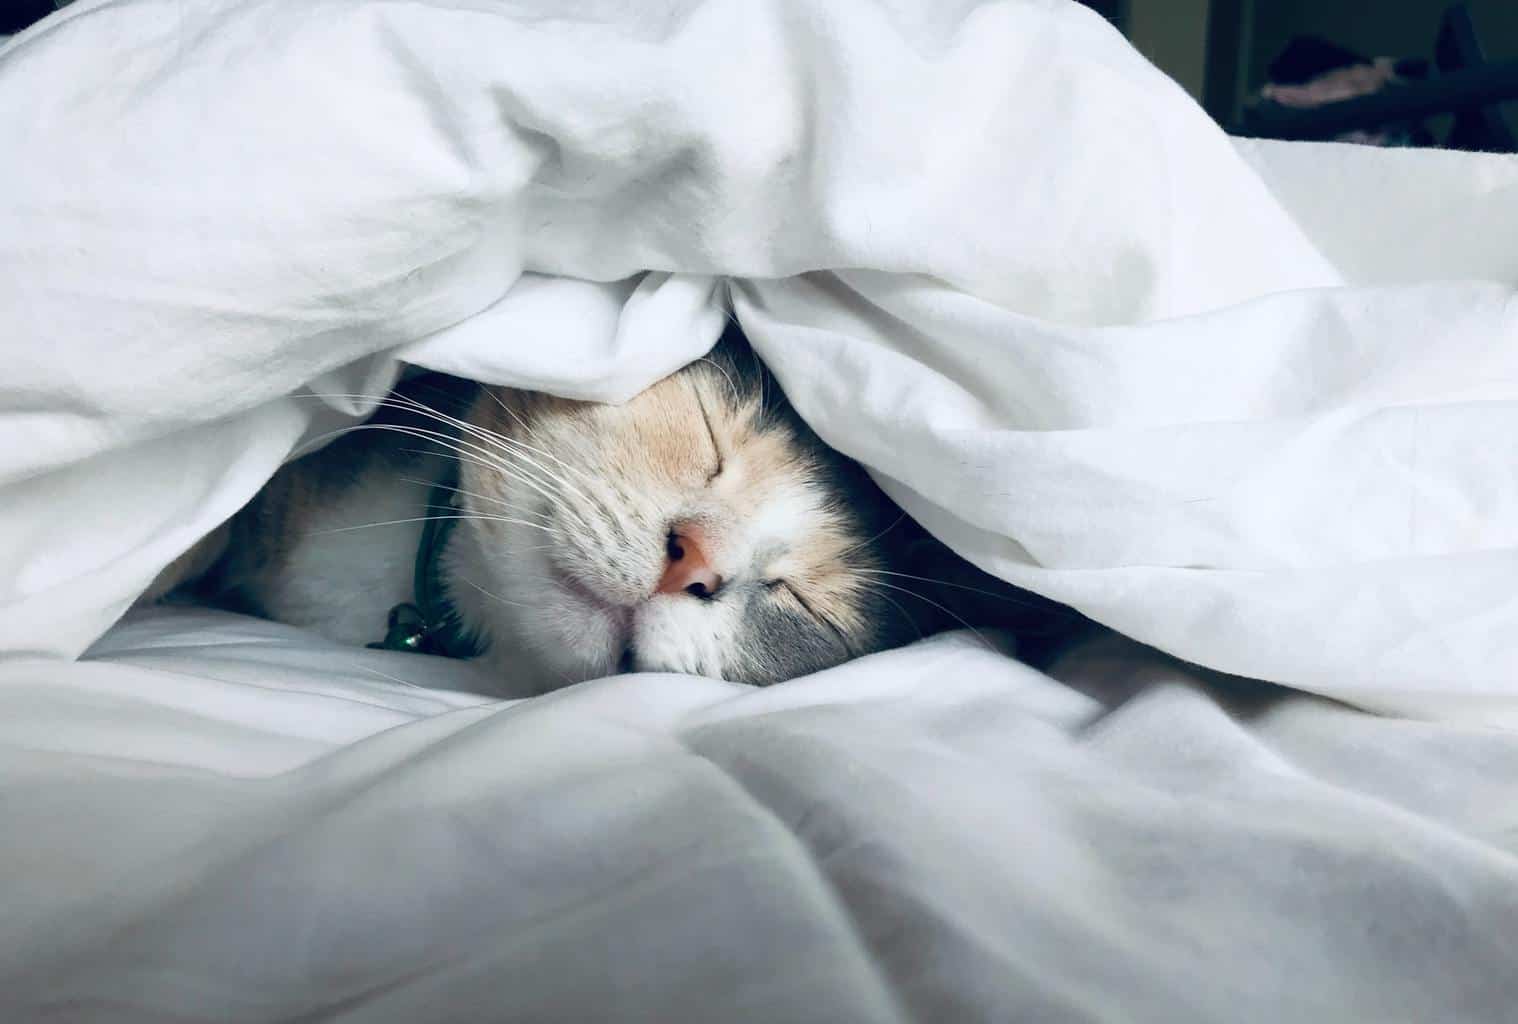 Cats and Kittens Sleeping Under Blankets – Safe?